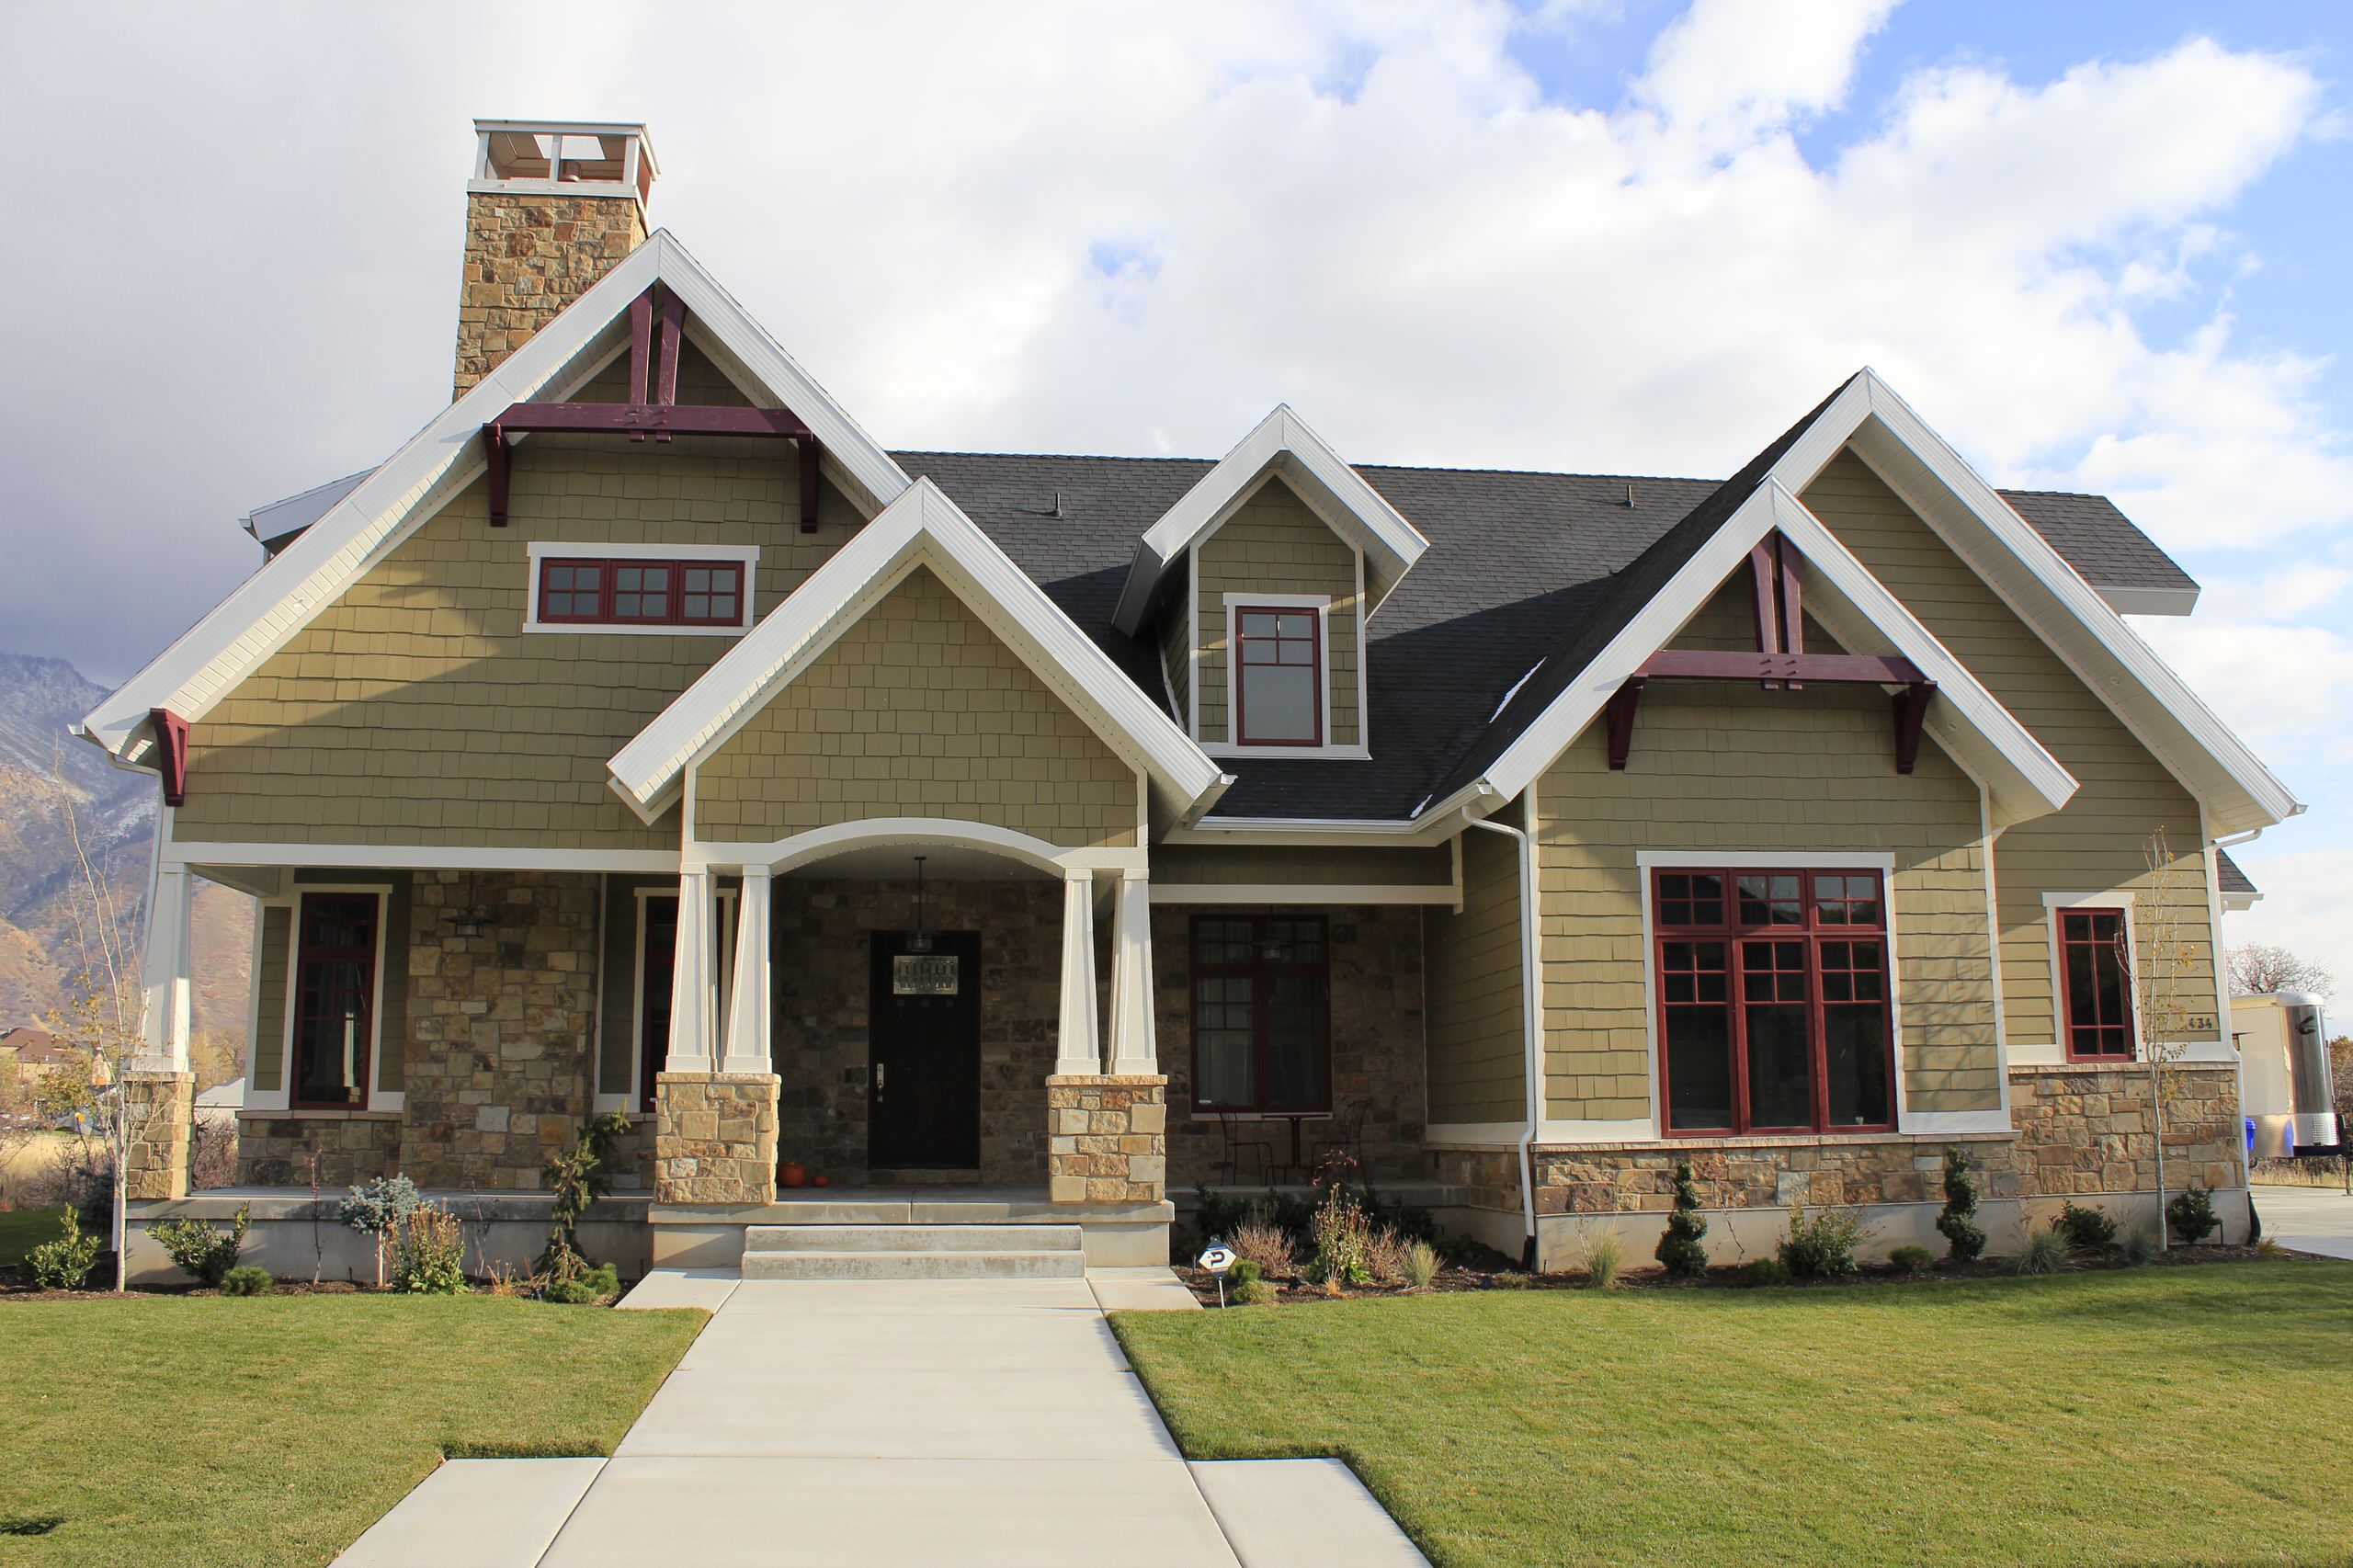 One Story Homes With Front Porch